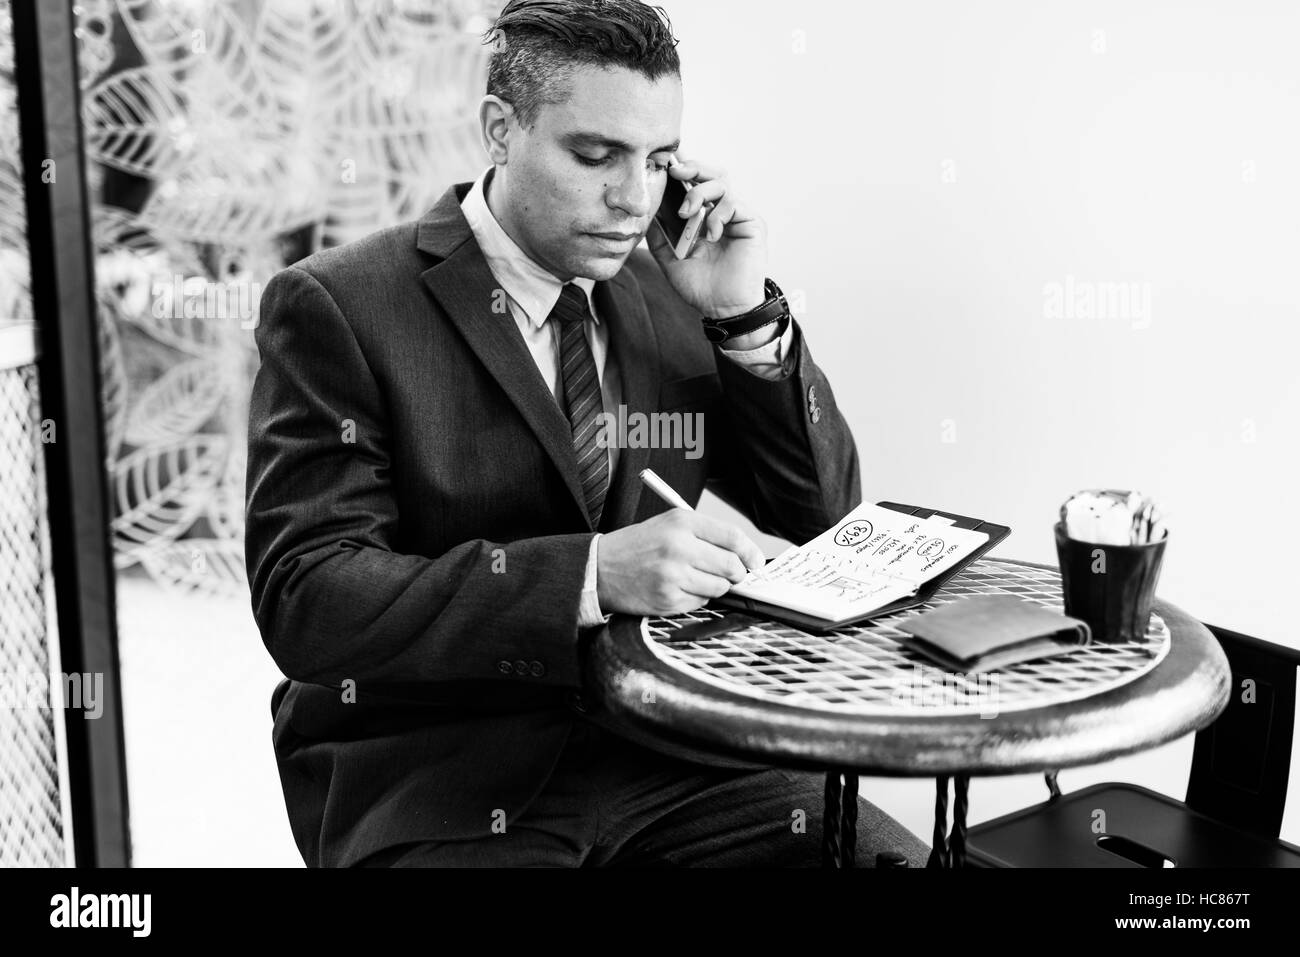 Business Man Calling Mobile Phone Concept Stock Photo